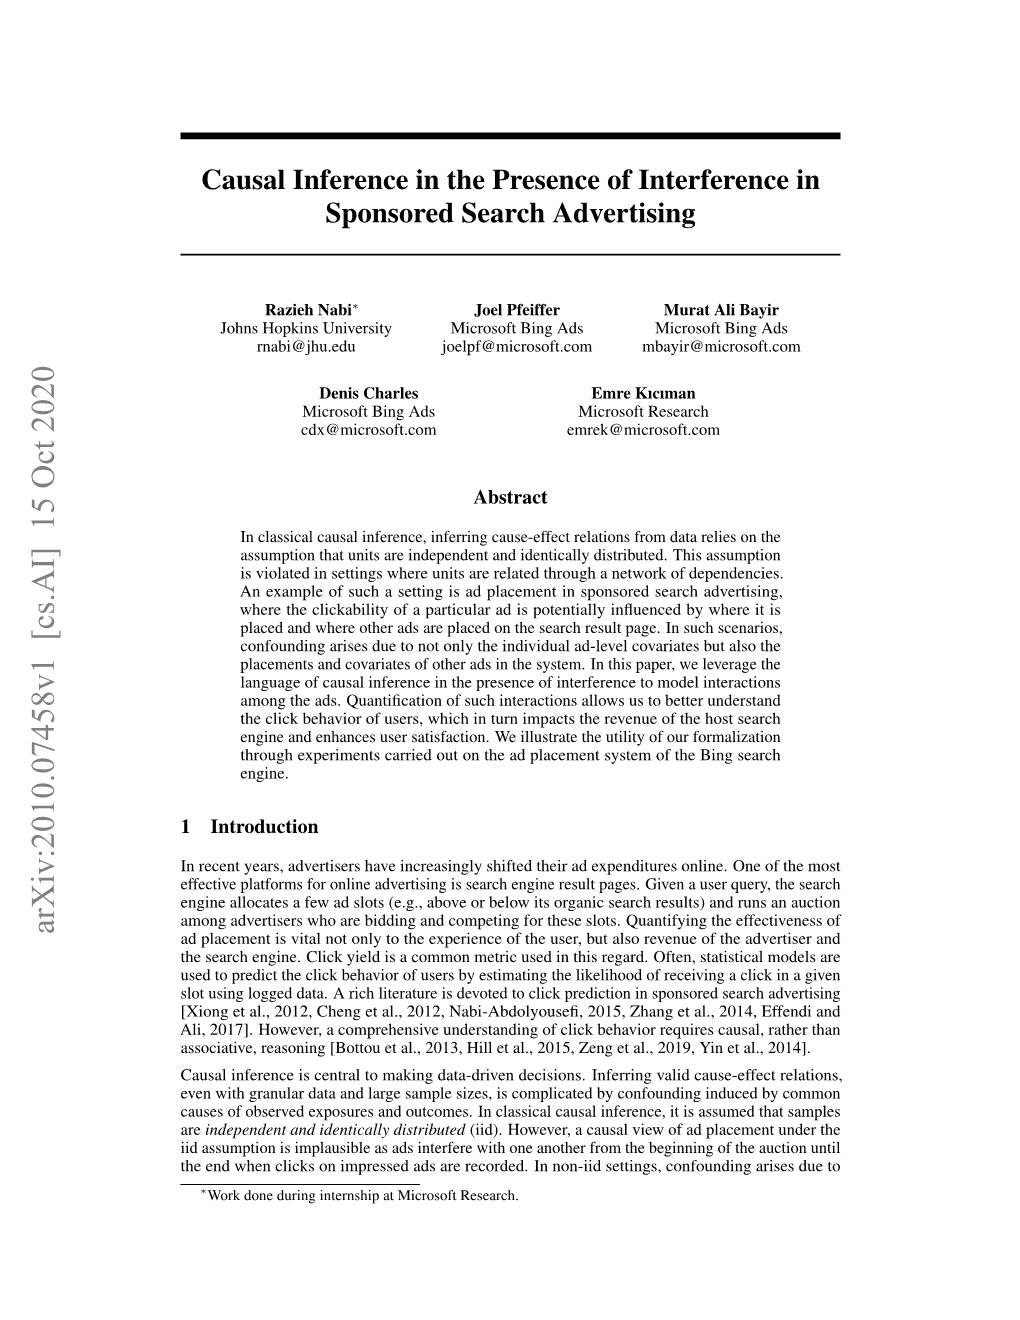 Causal Inference in the Presence of Interference in Sponsored Search Advertising